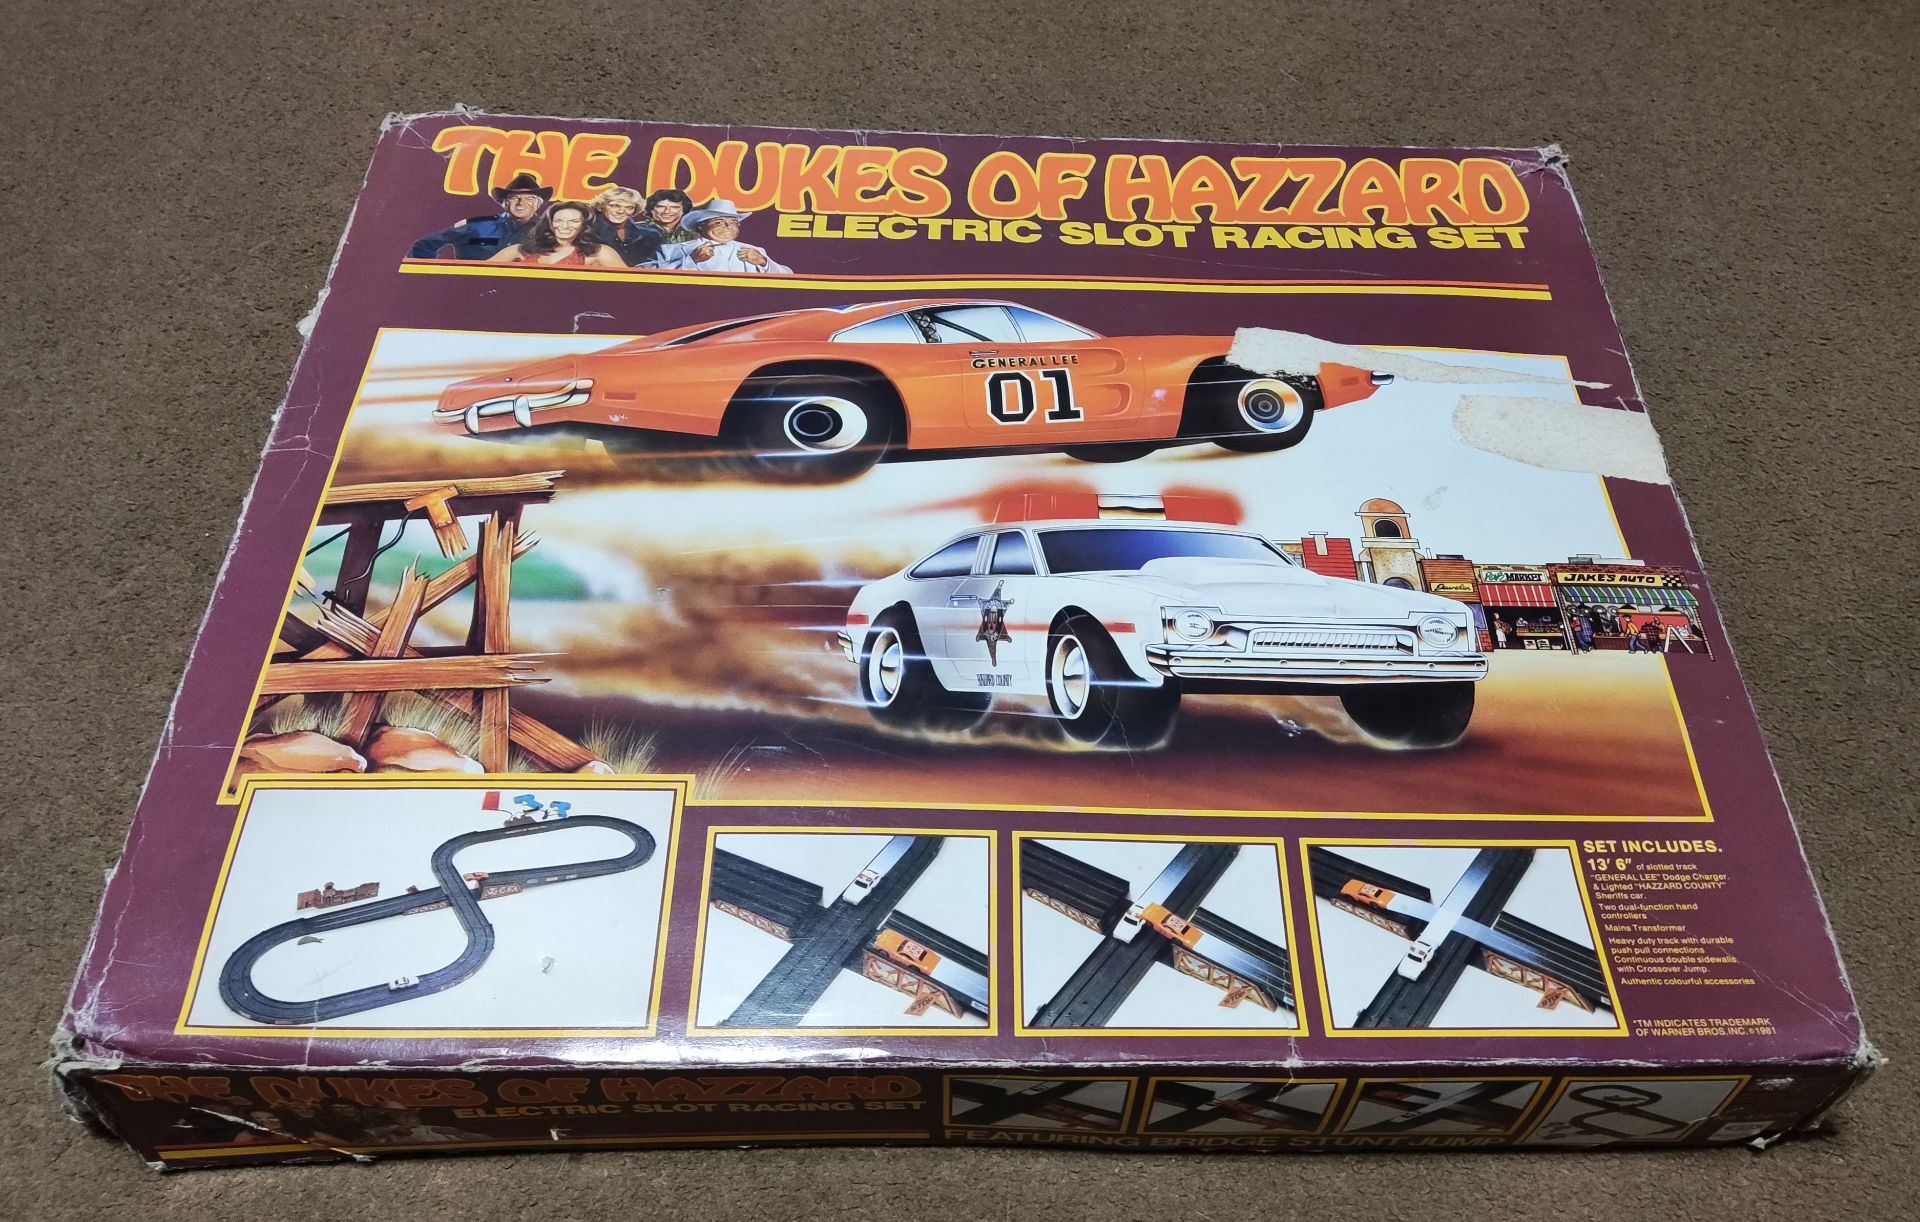 1 x Vintage Dukes of Hazzard Electric Slot Racing Set - Used - CL444 - NO VAT ON THE HAMMER - - Image 5 of 26